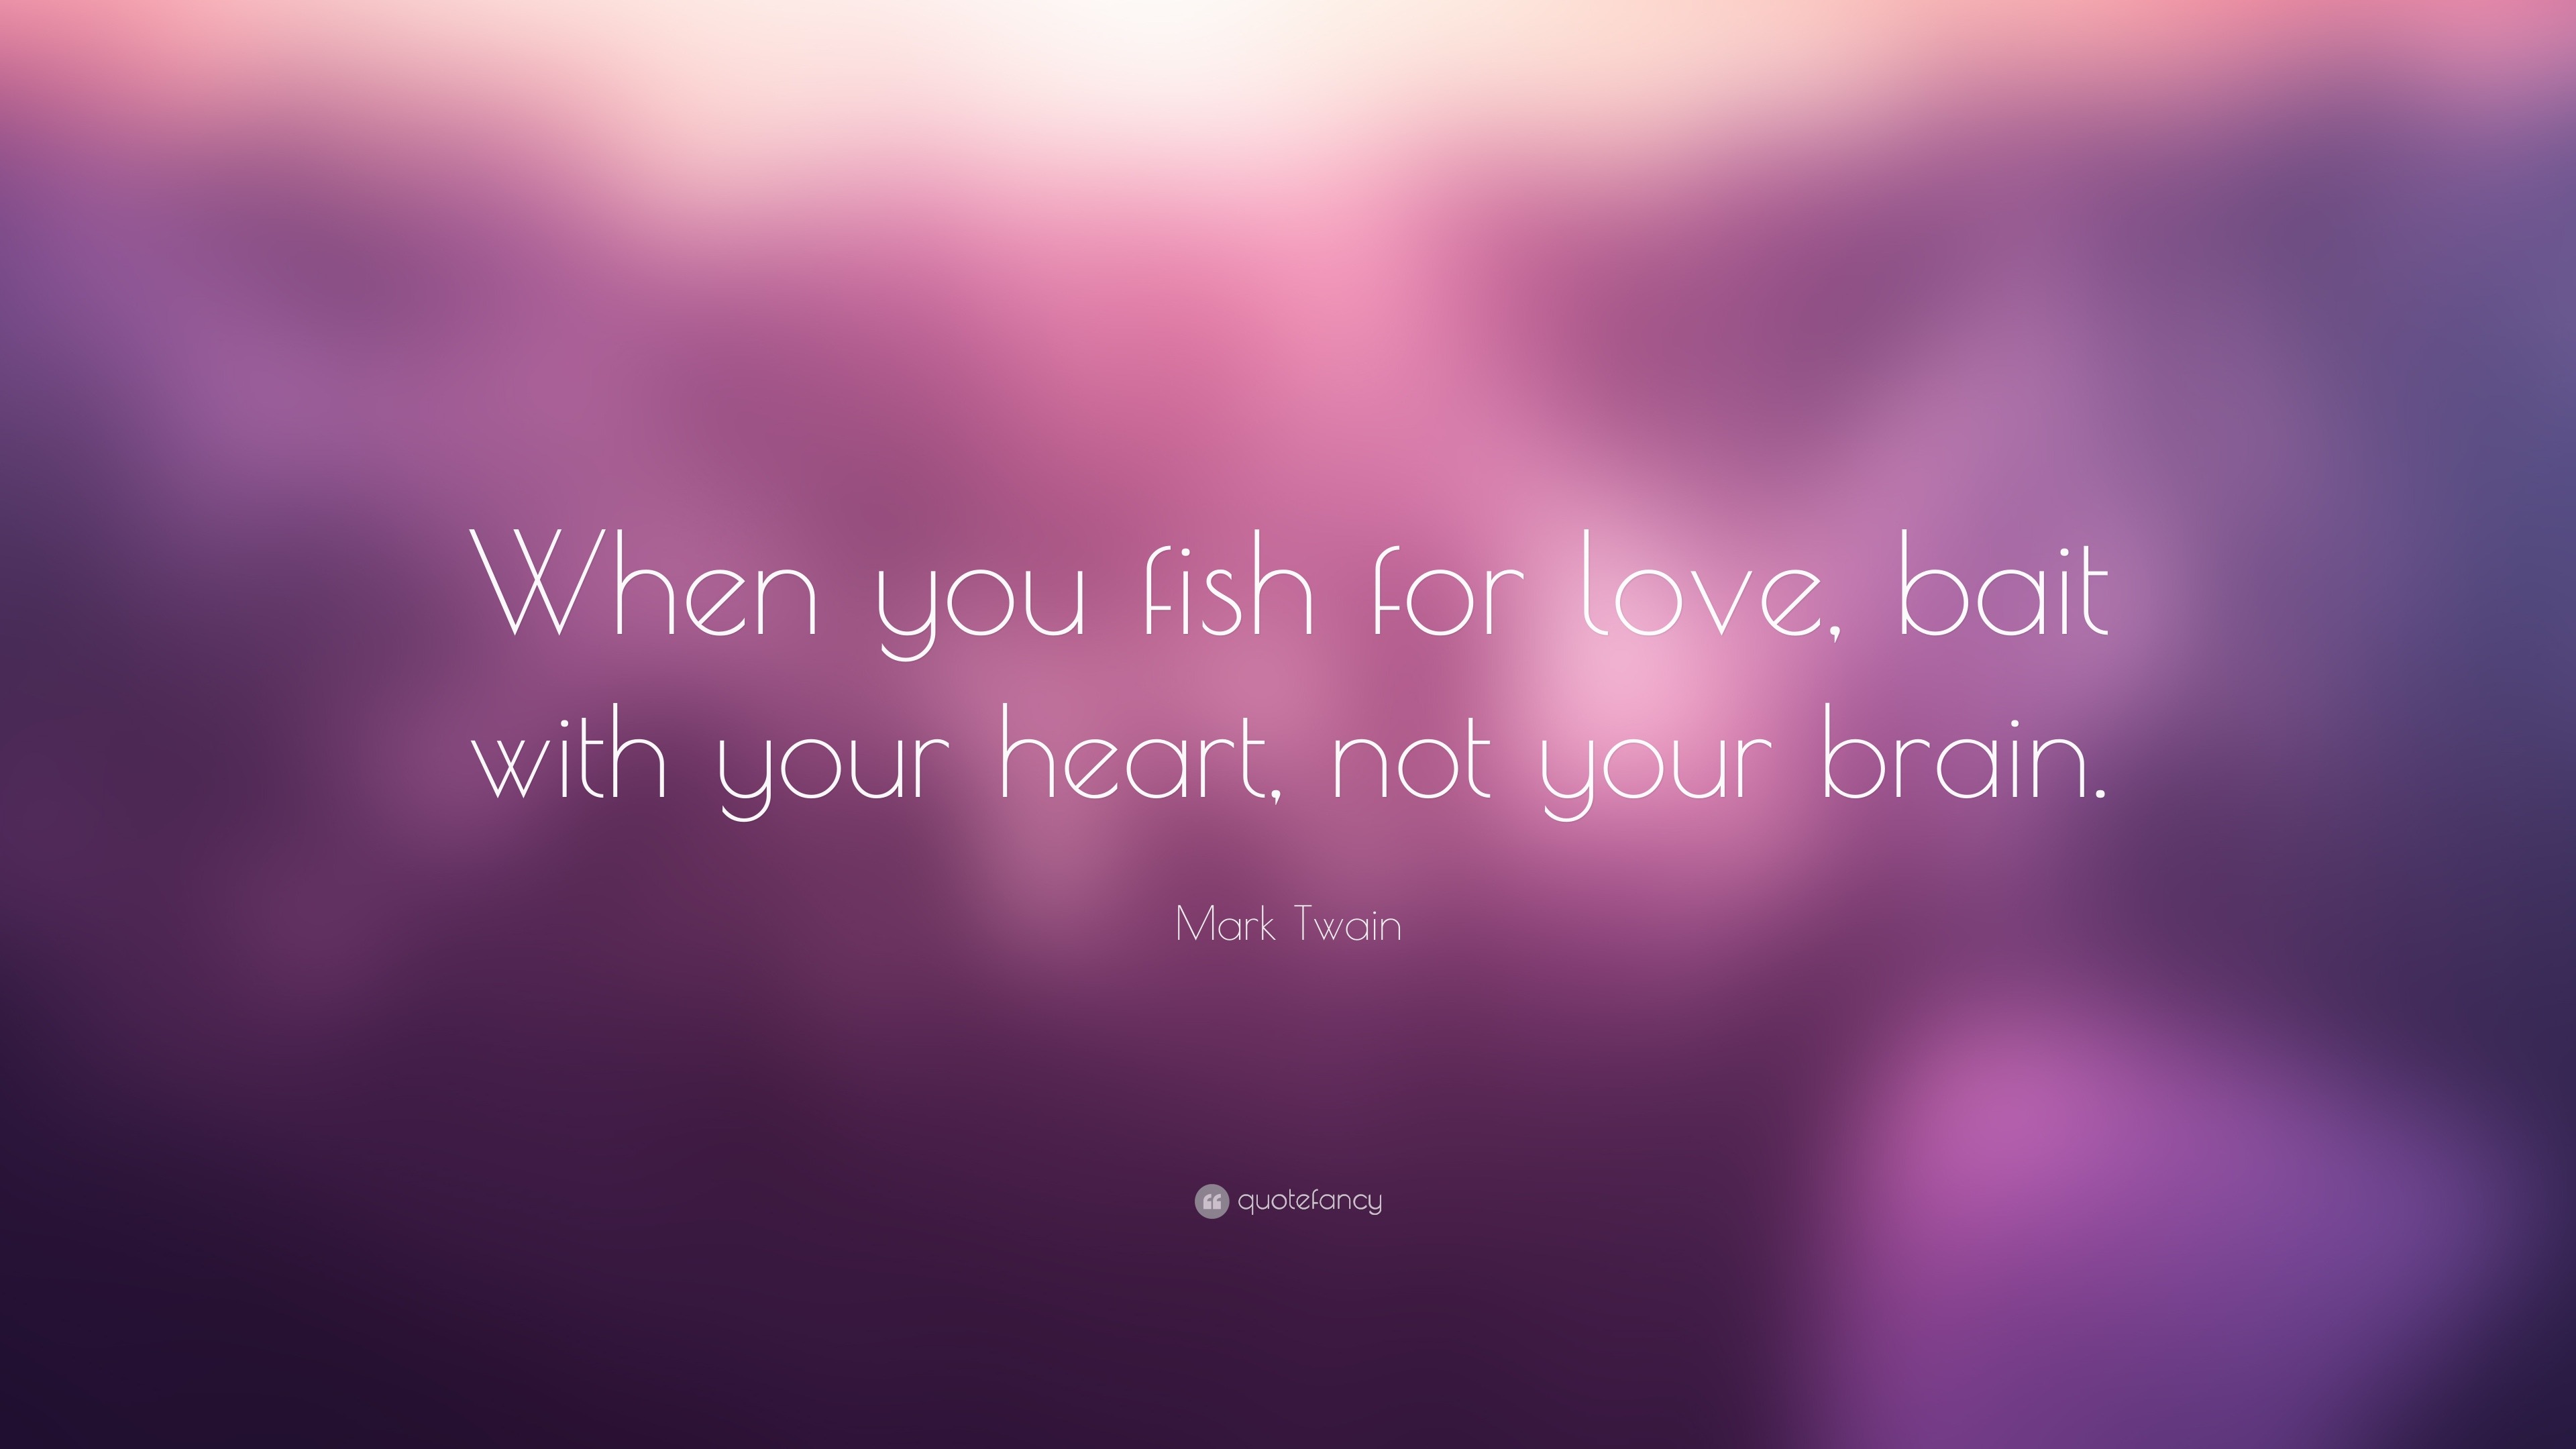 Mark Twain Quote “When you fish for love bait with your heart